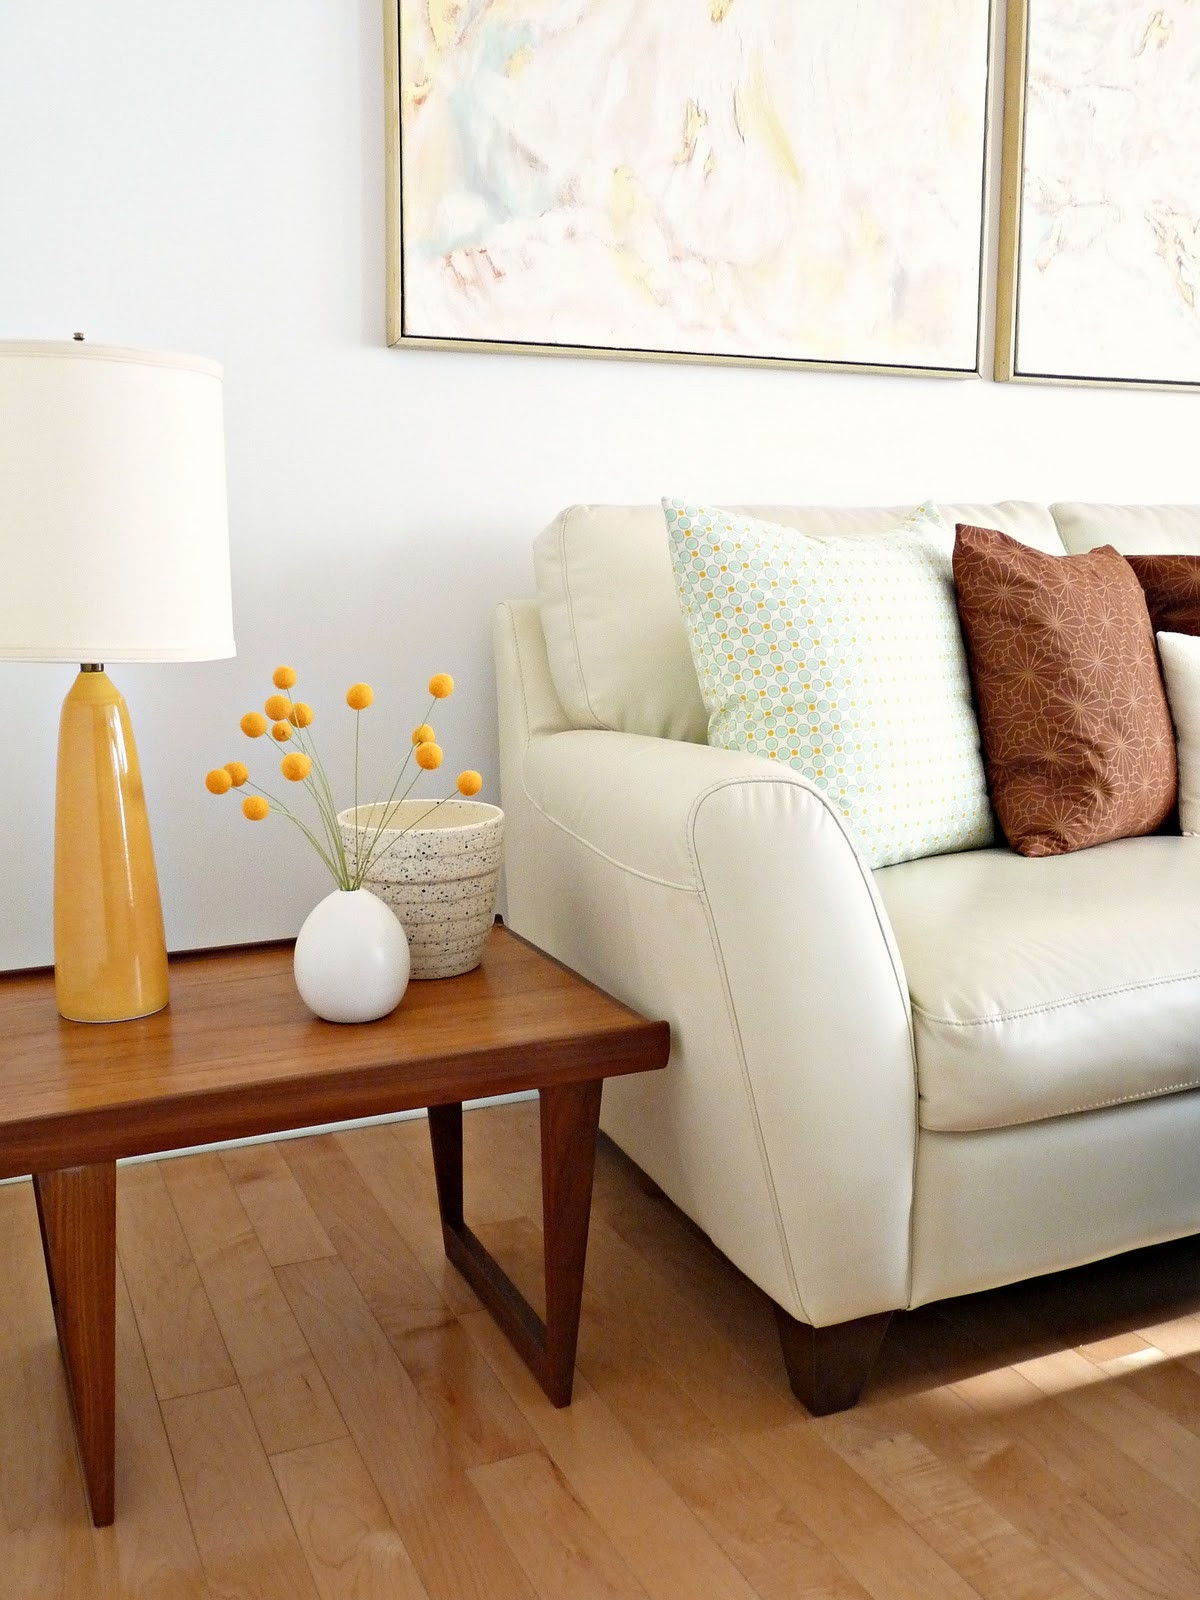 End Tables for Living Room Living Room Ideas on a Budget ...